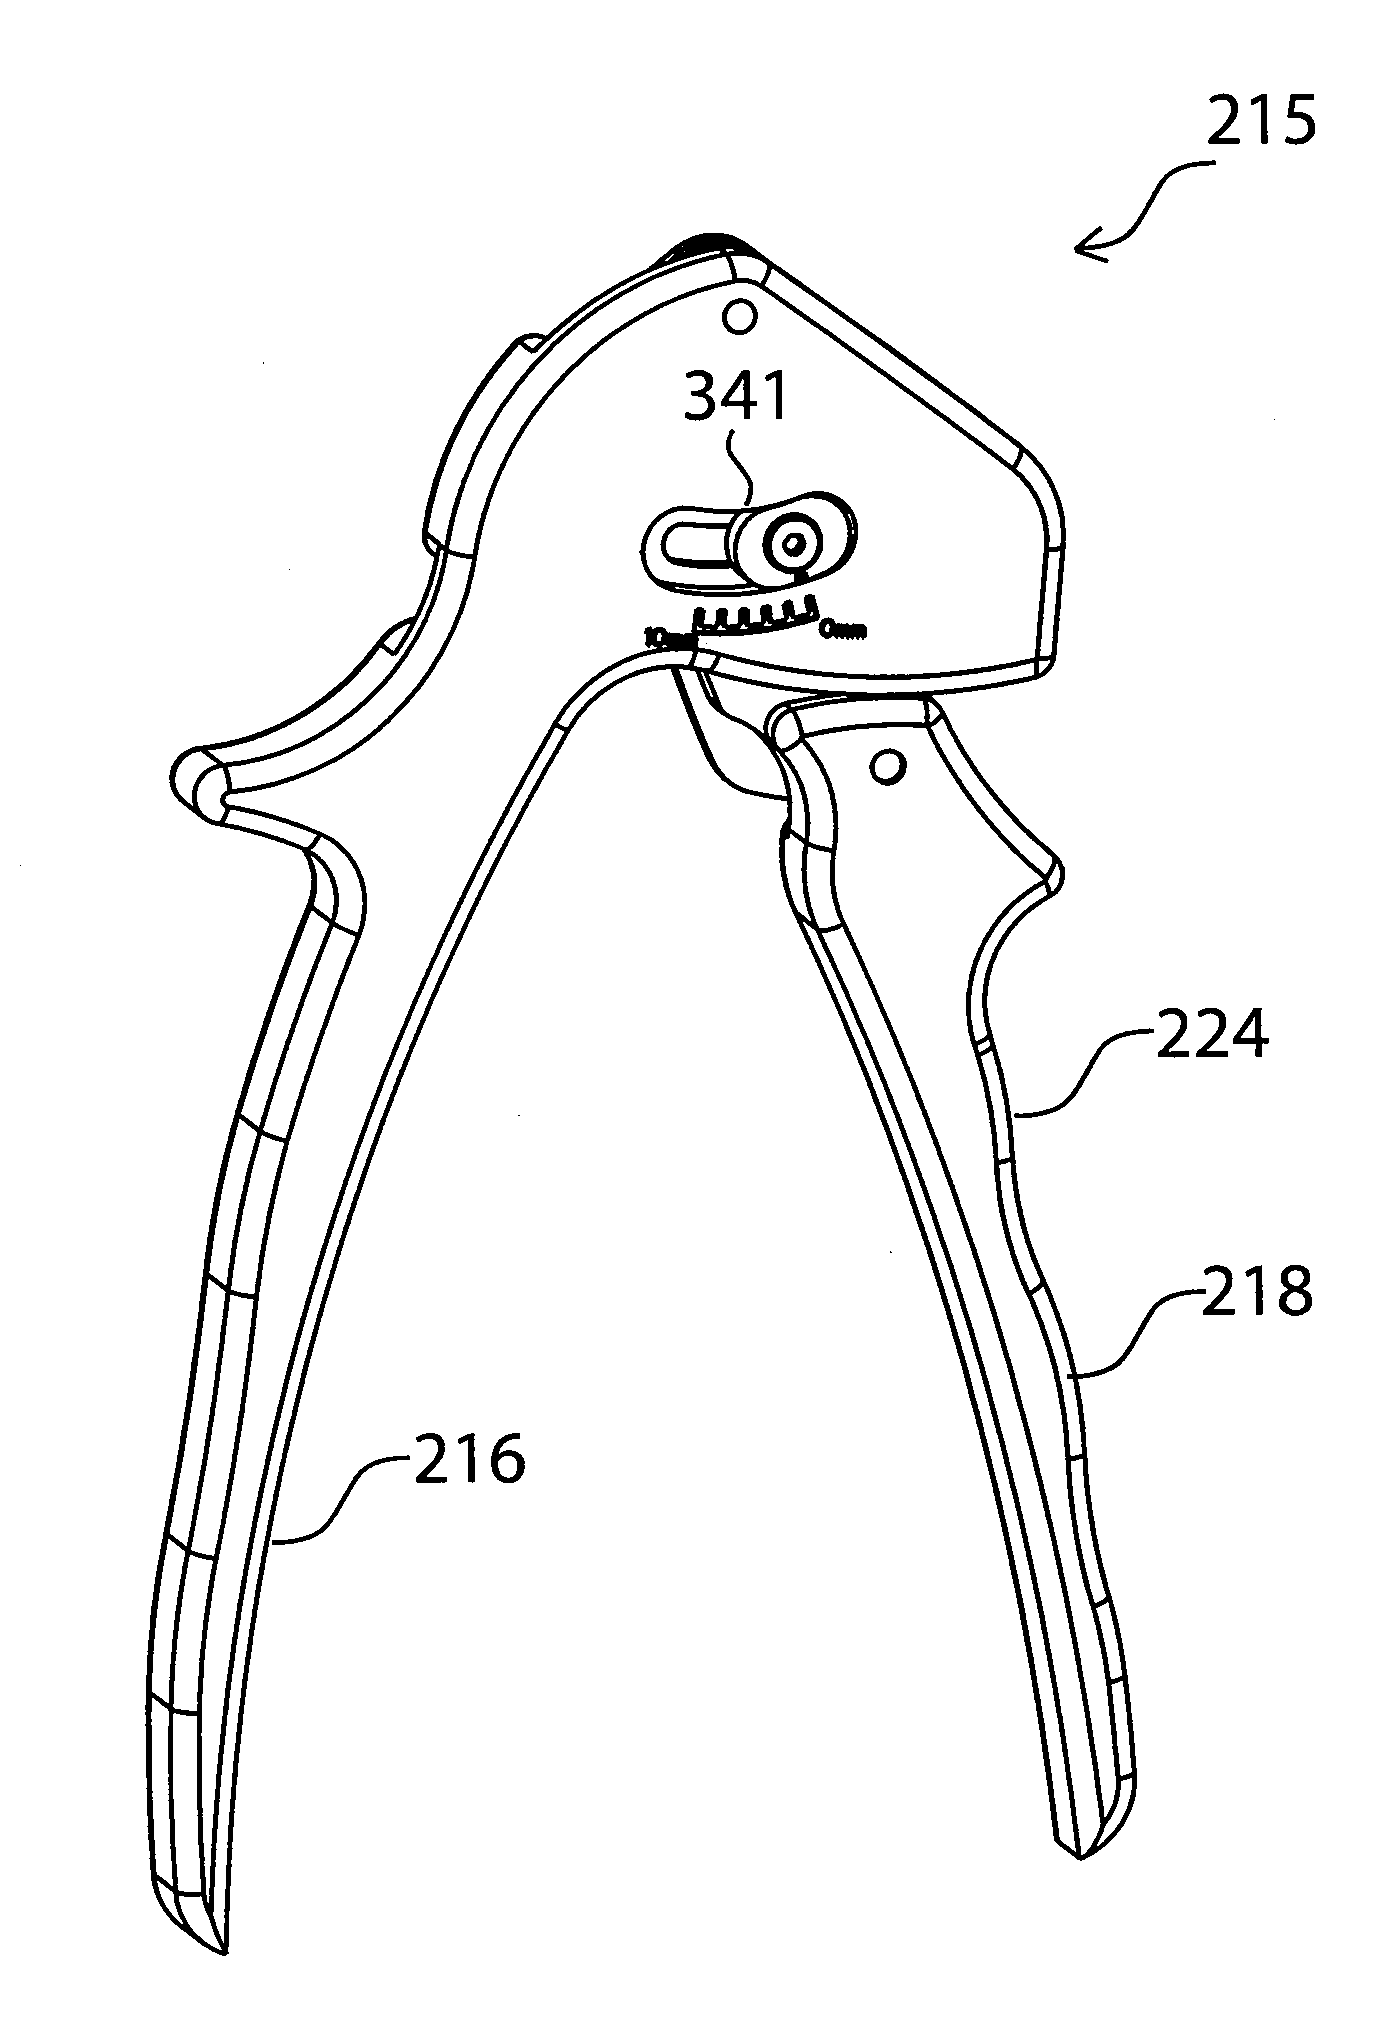 Tensioning system and method for the fixation of bone fractures